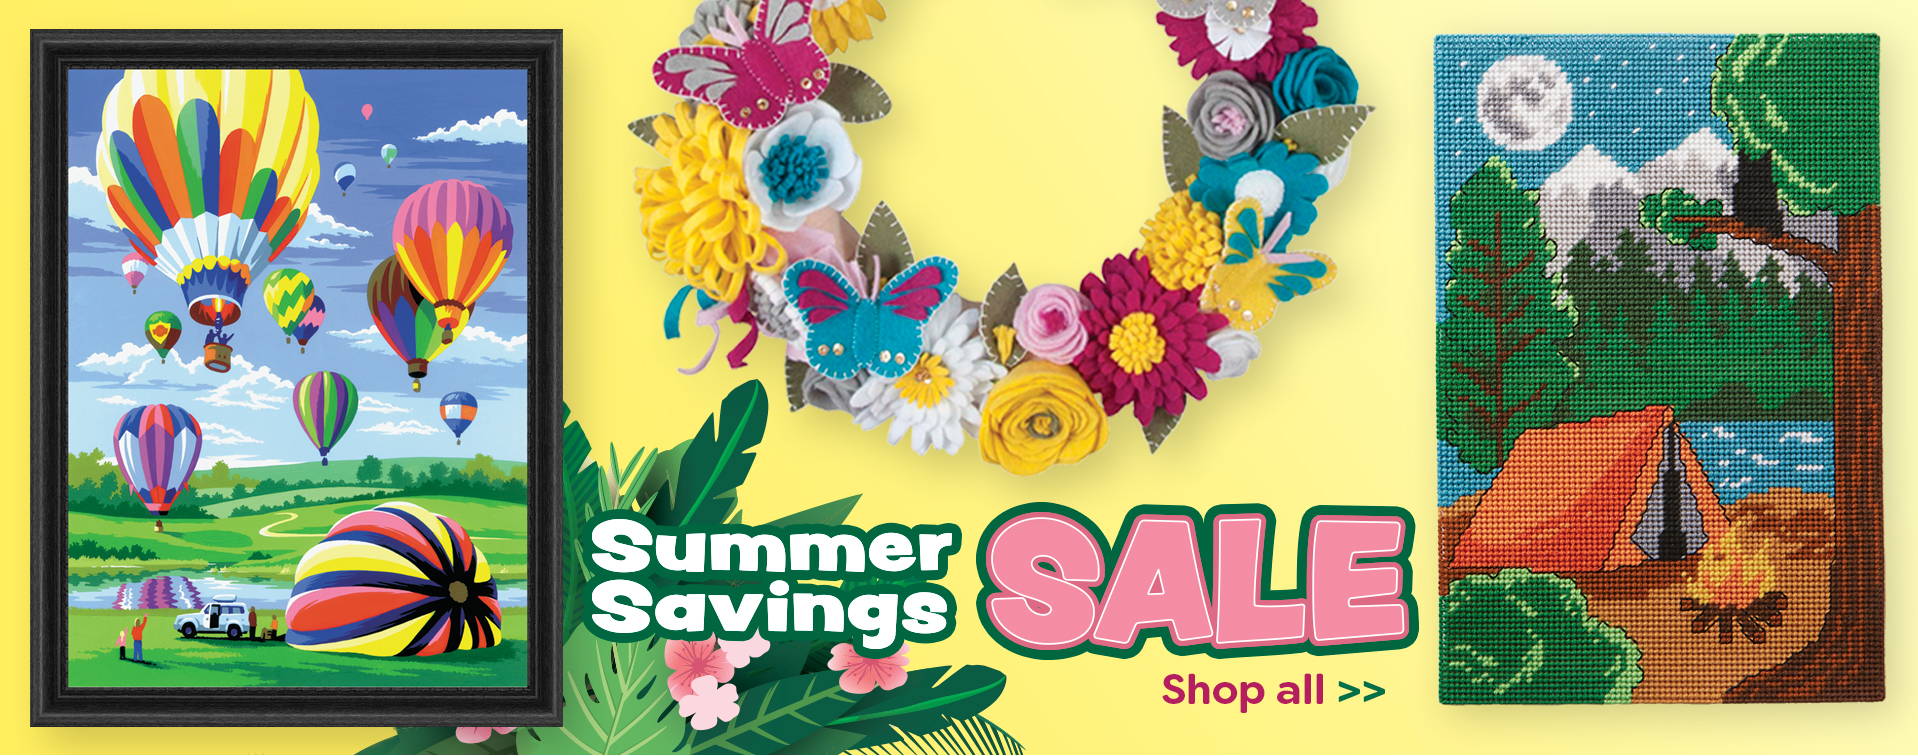 Summer Savings Sale. Image: Featured Craft & Hobby Projects.